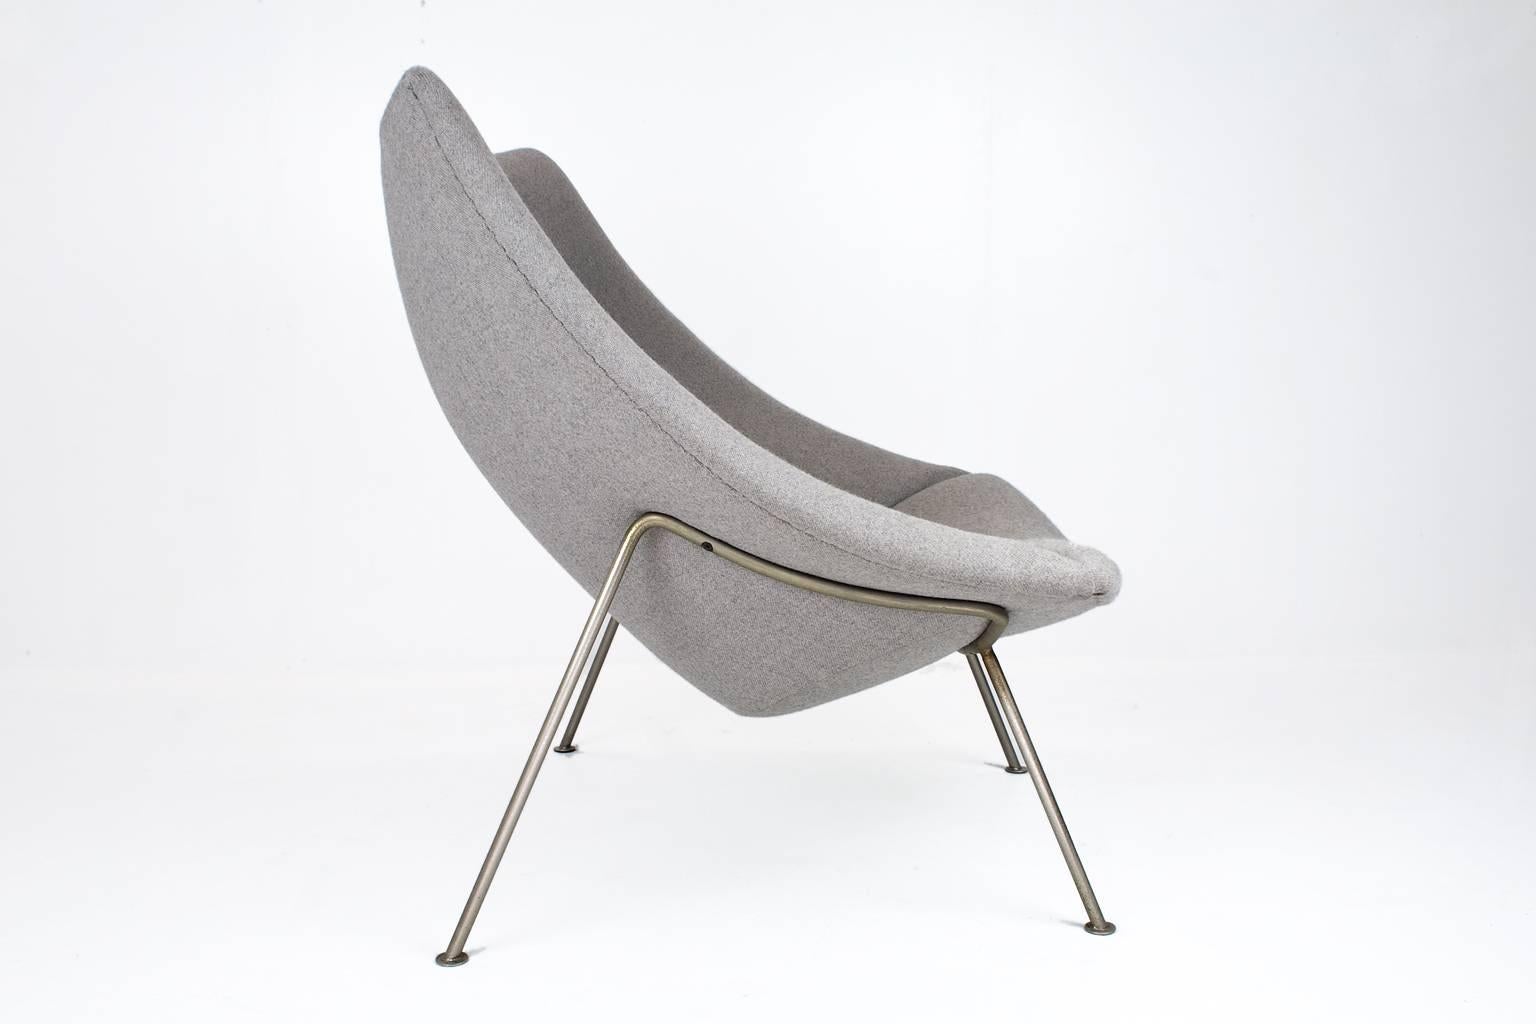 Big oyster chair model F157 designed by Pierre Paulin for Artifort, the Netherlands in 1959, Artifort collection 1960-1979. This large edition of the Oyster chair is recently reupholstered in a mid-grey color Ploegwool (no.79)

This easy chair has